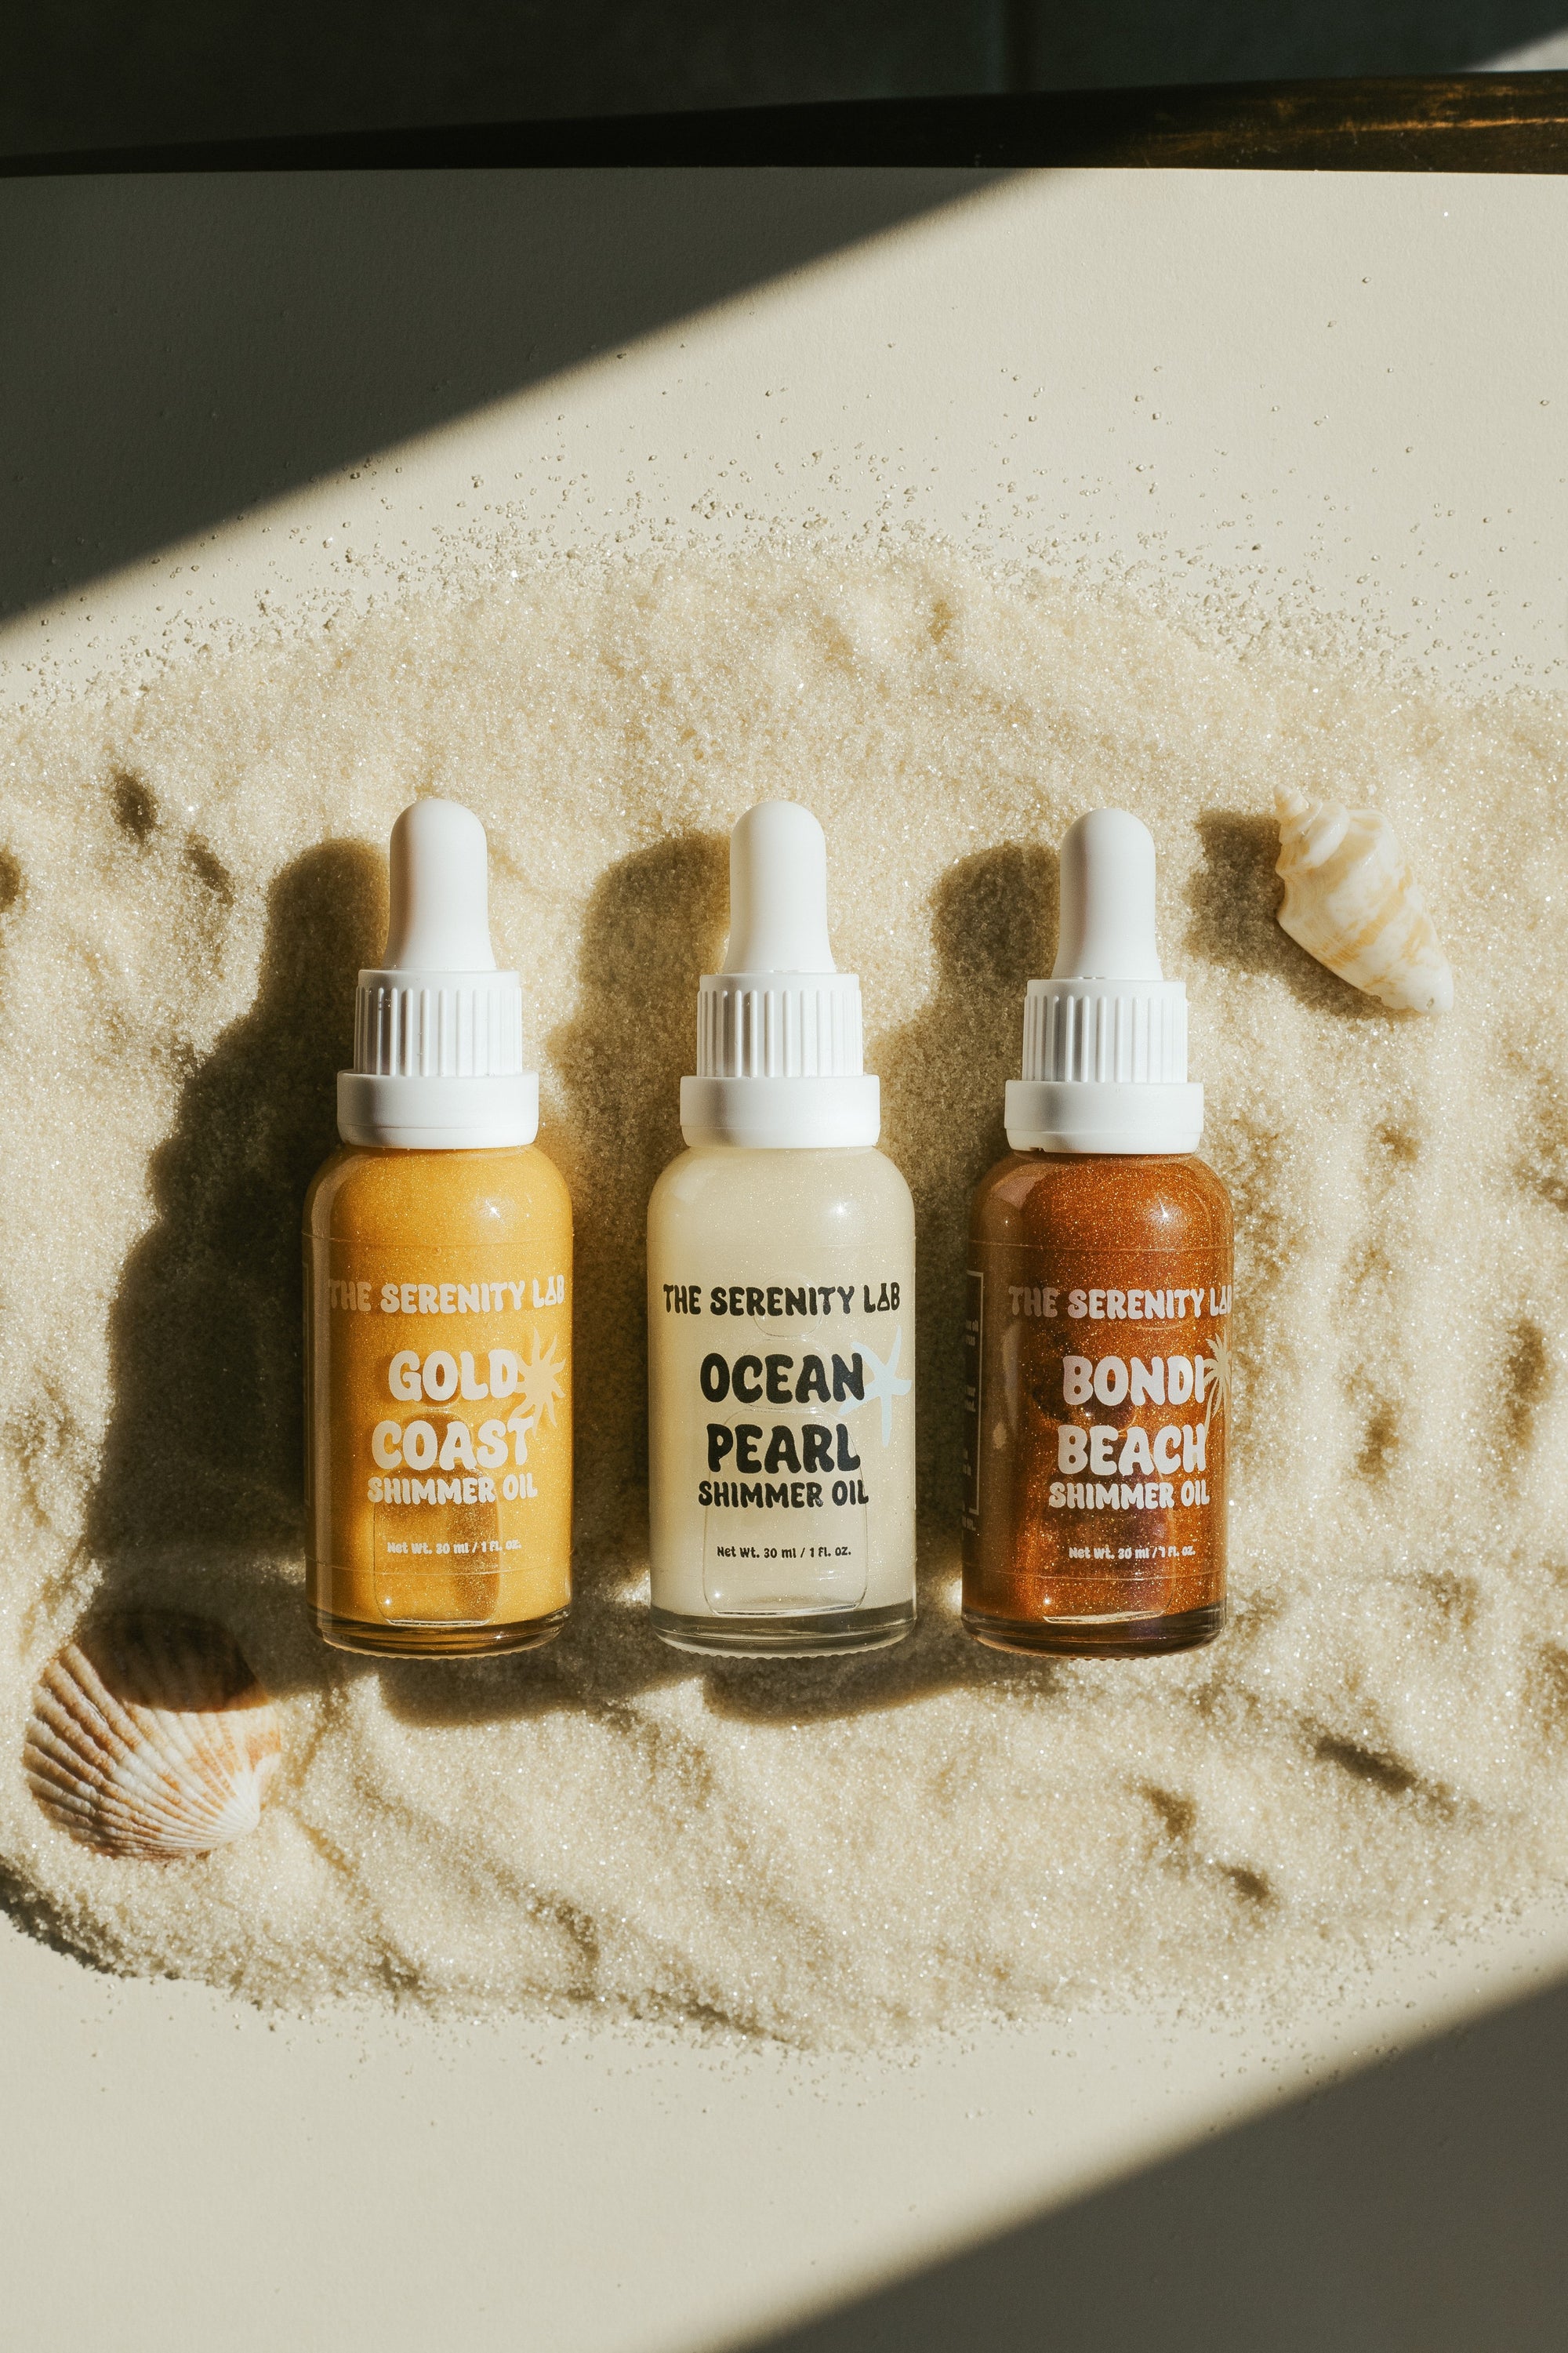 Unlocking the Glow: Can The Serenity Lab's Body Shimmer Oils Illuminate Your Skin?